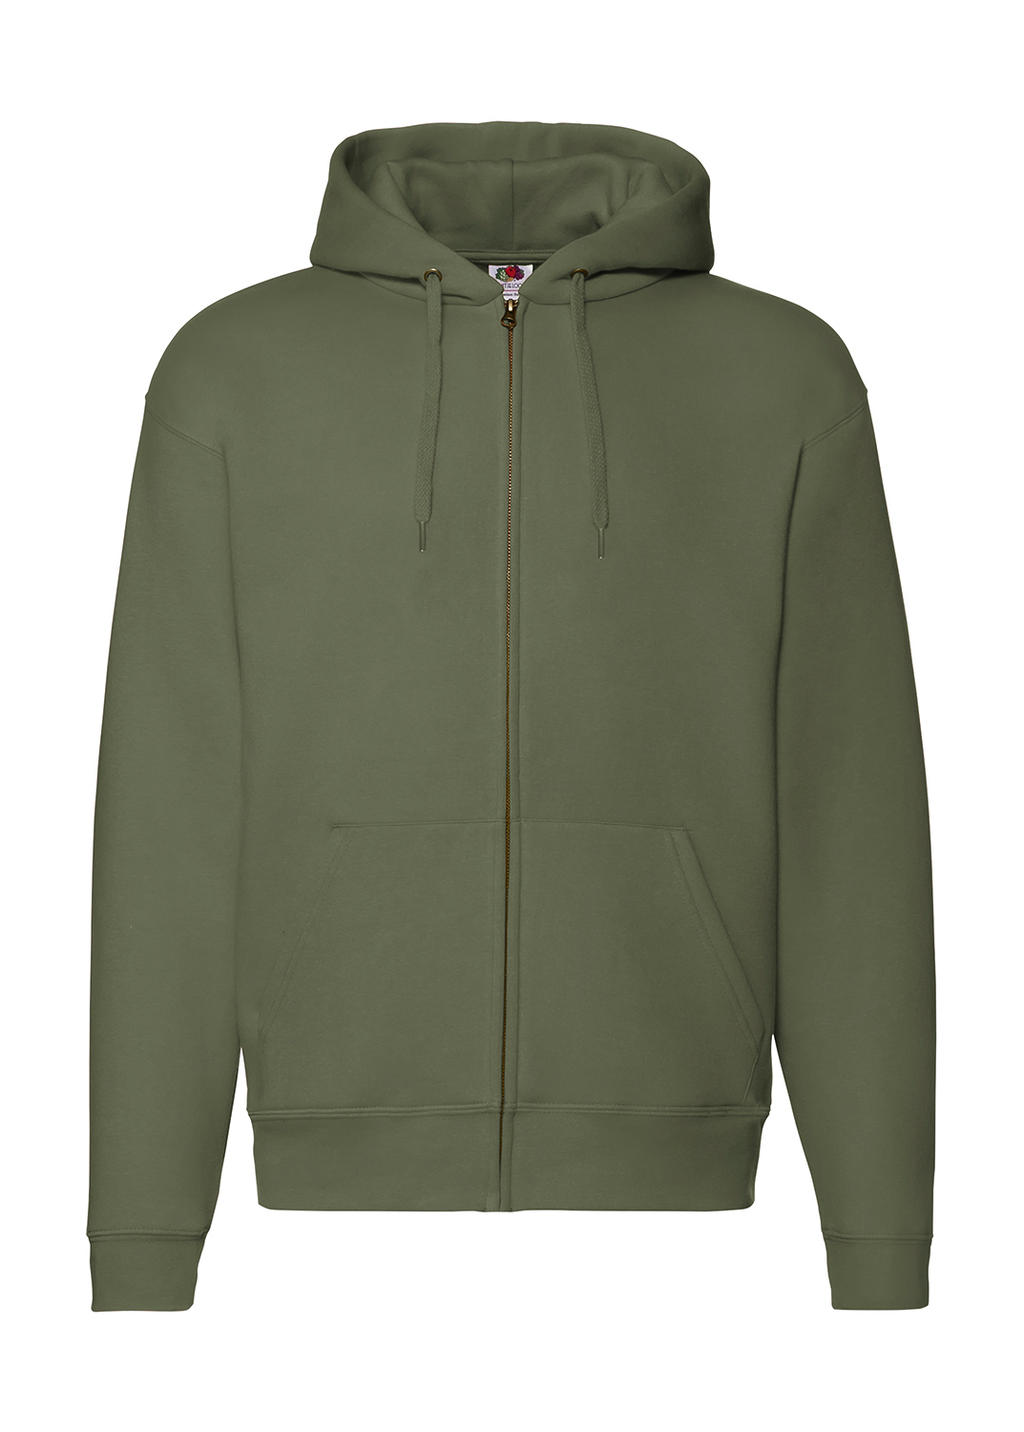  Premium Hooded Zip Sweat in Farbe Classic Olive